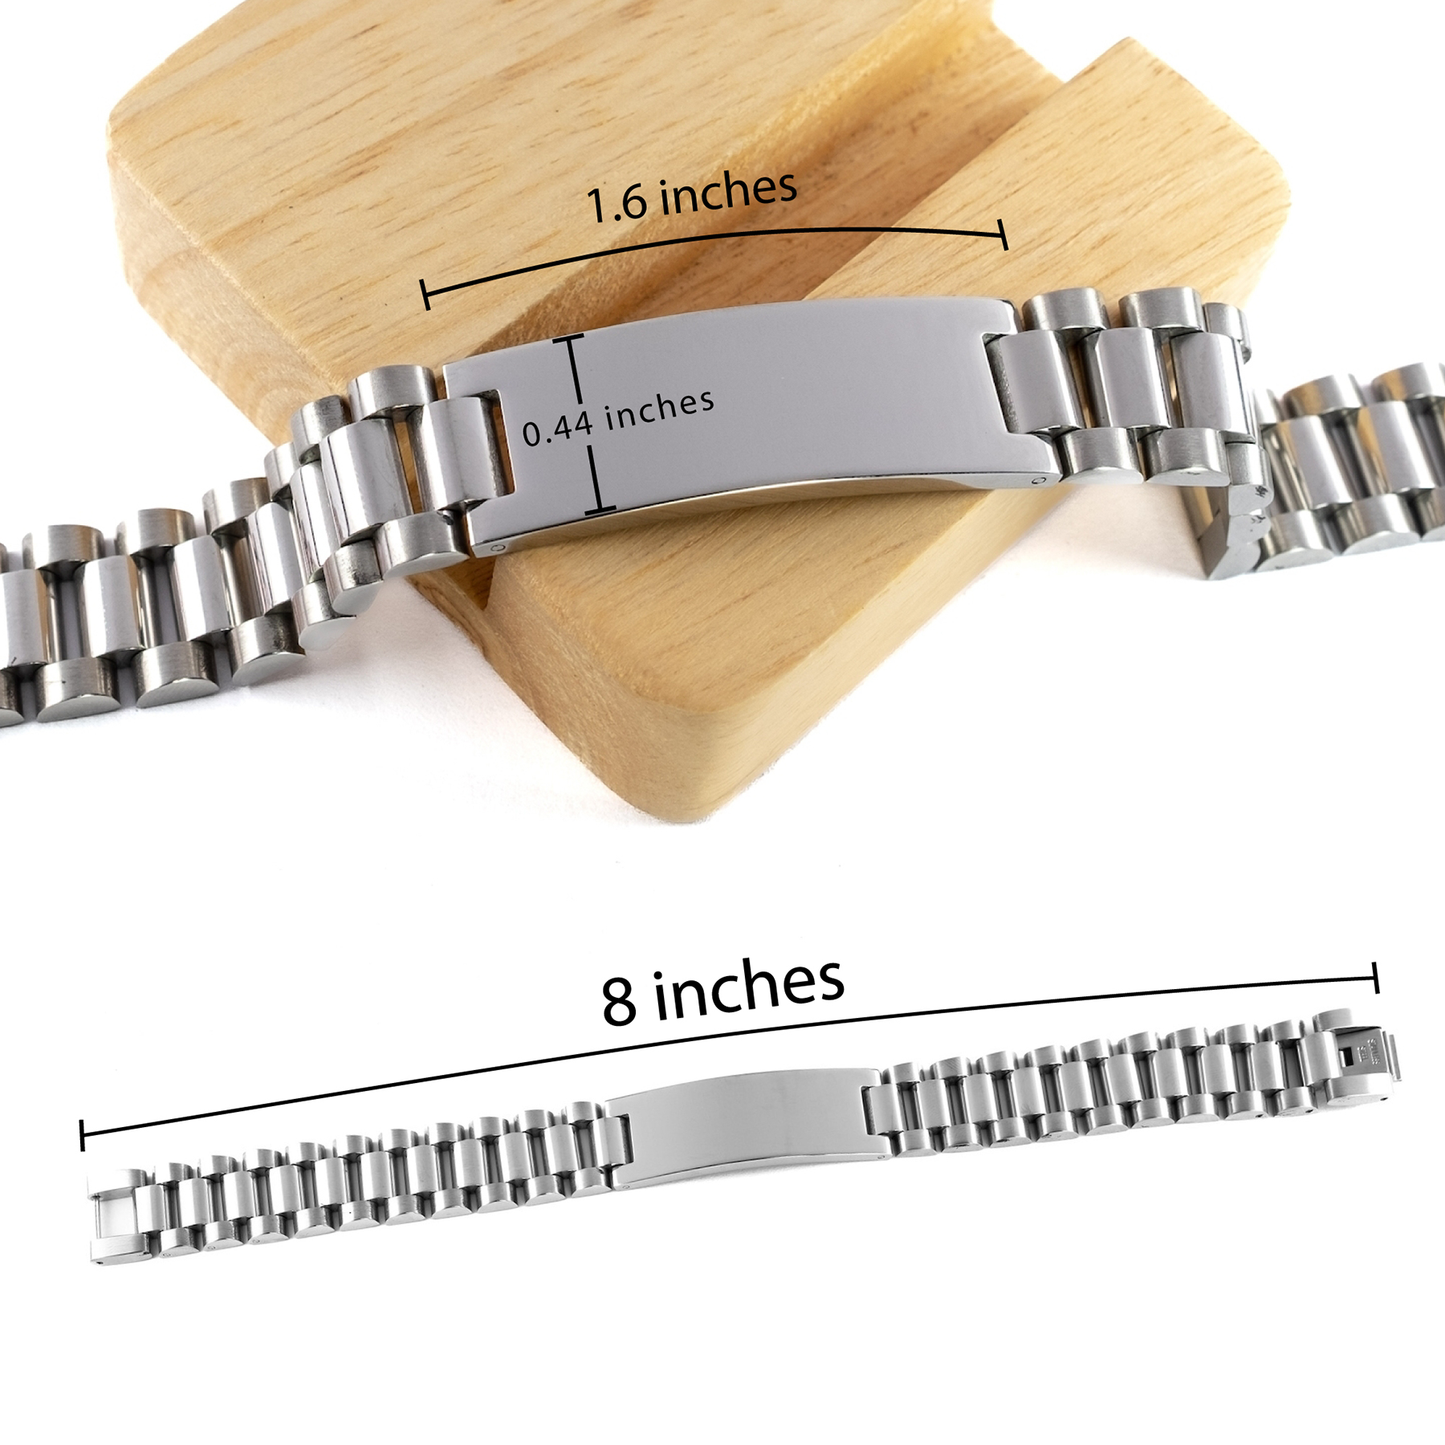 Stainless Steel Grandpa Bracelet - A Special Place in My Heart, Engraved Grandpa, Grandpa Gift for Christmas, Birthday, and Holidays - Unique Bracelet for Grandpa